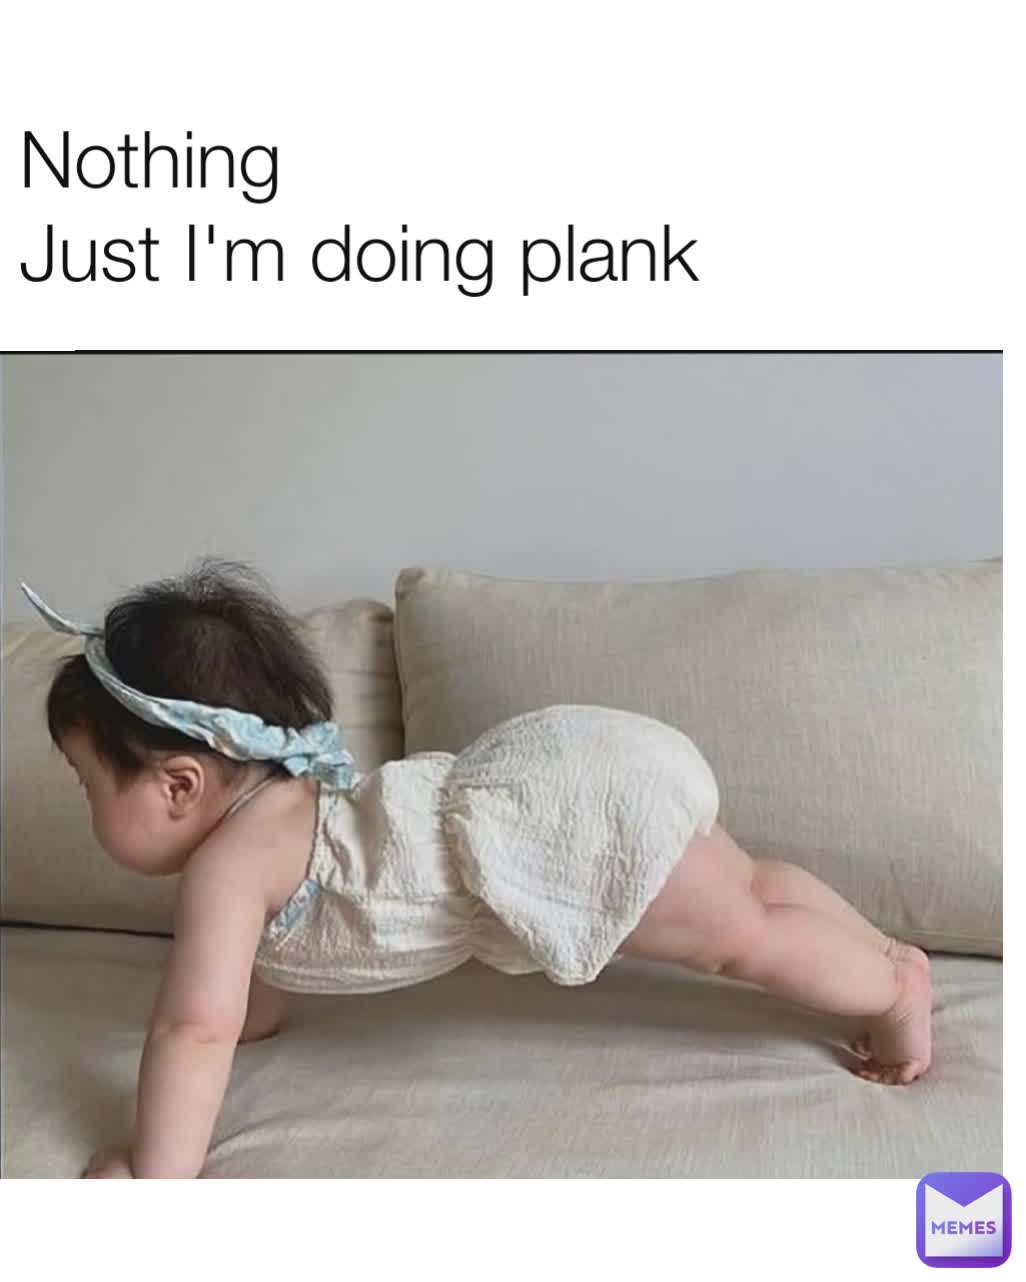 Nothing
Just I'm doing plank